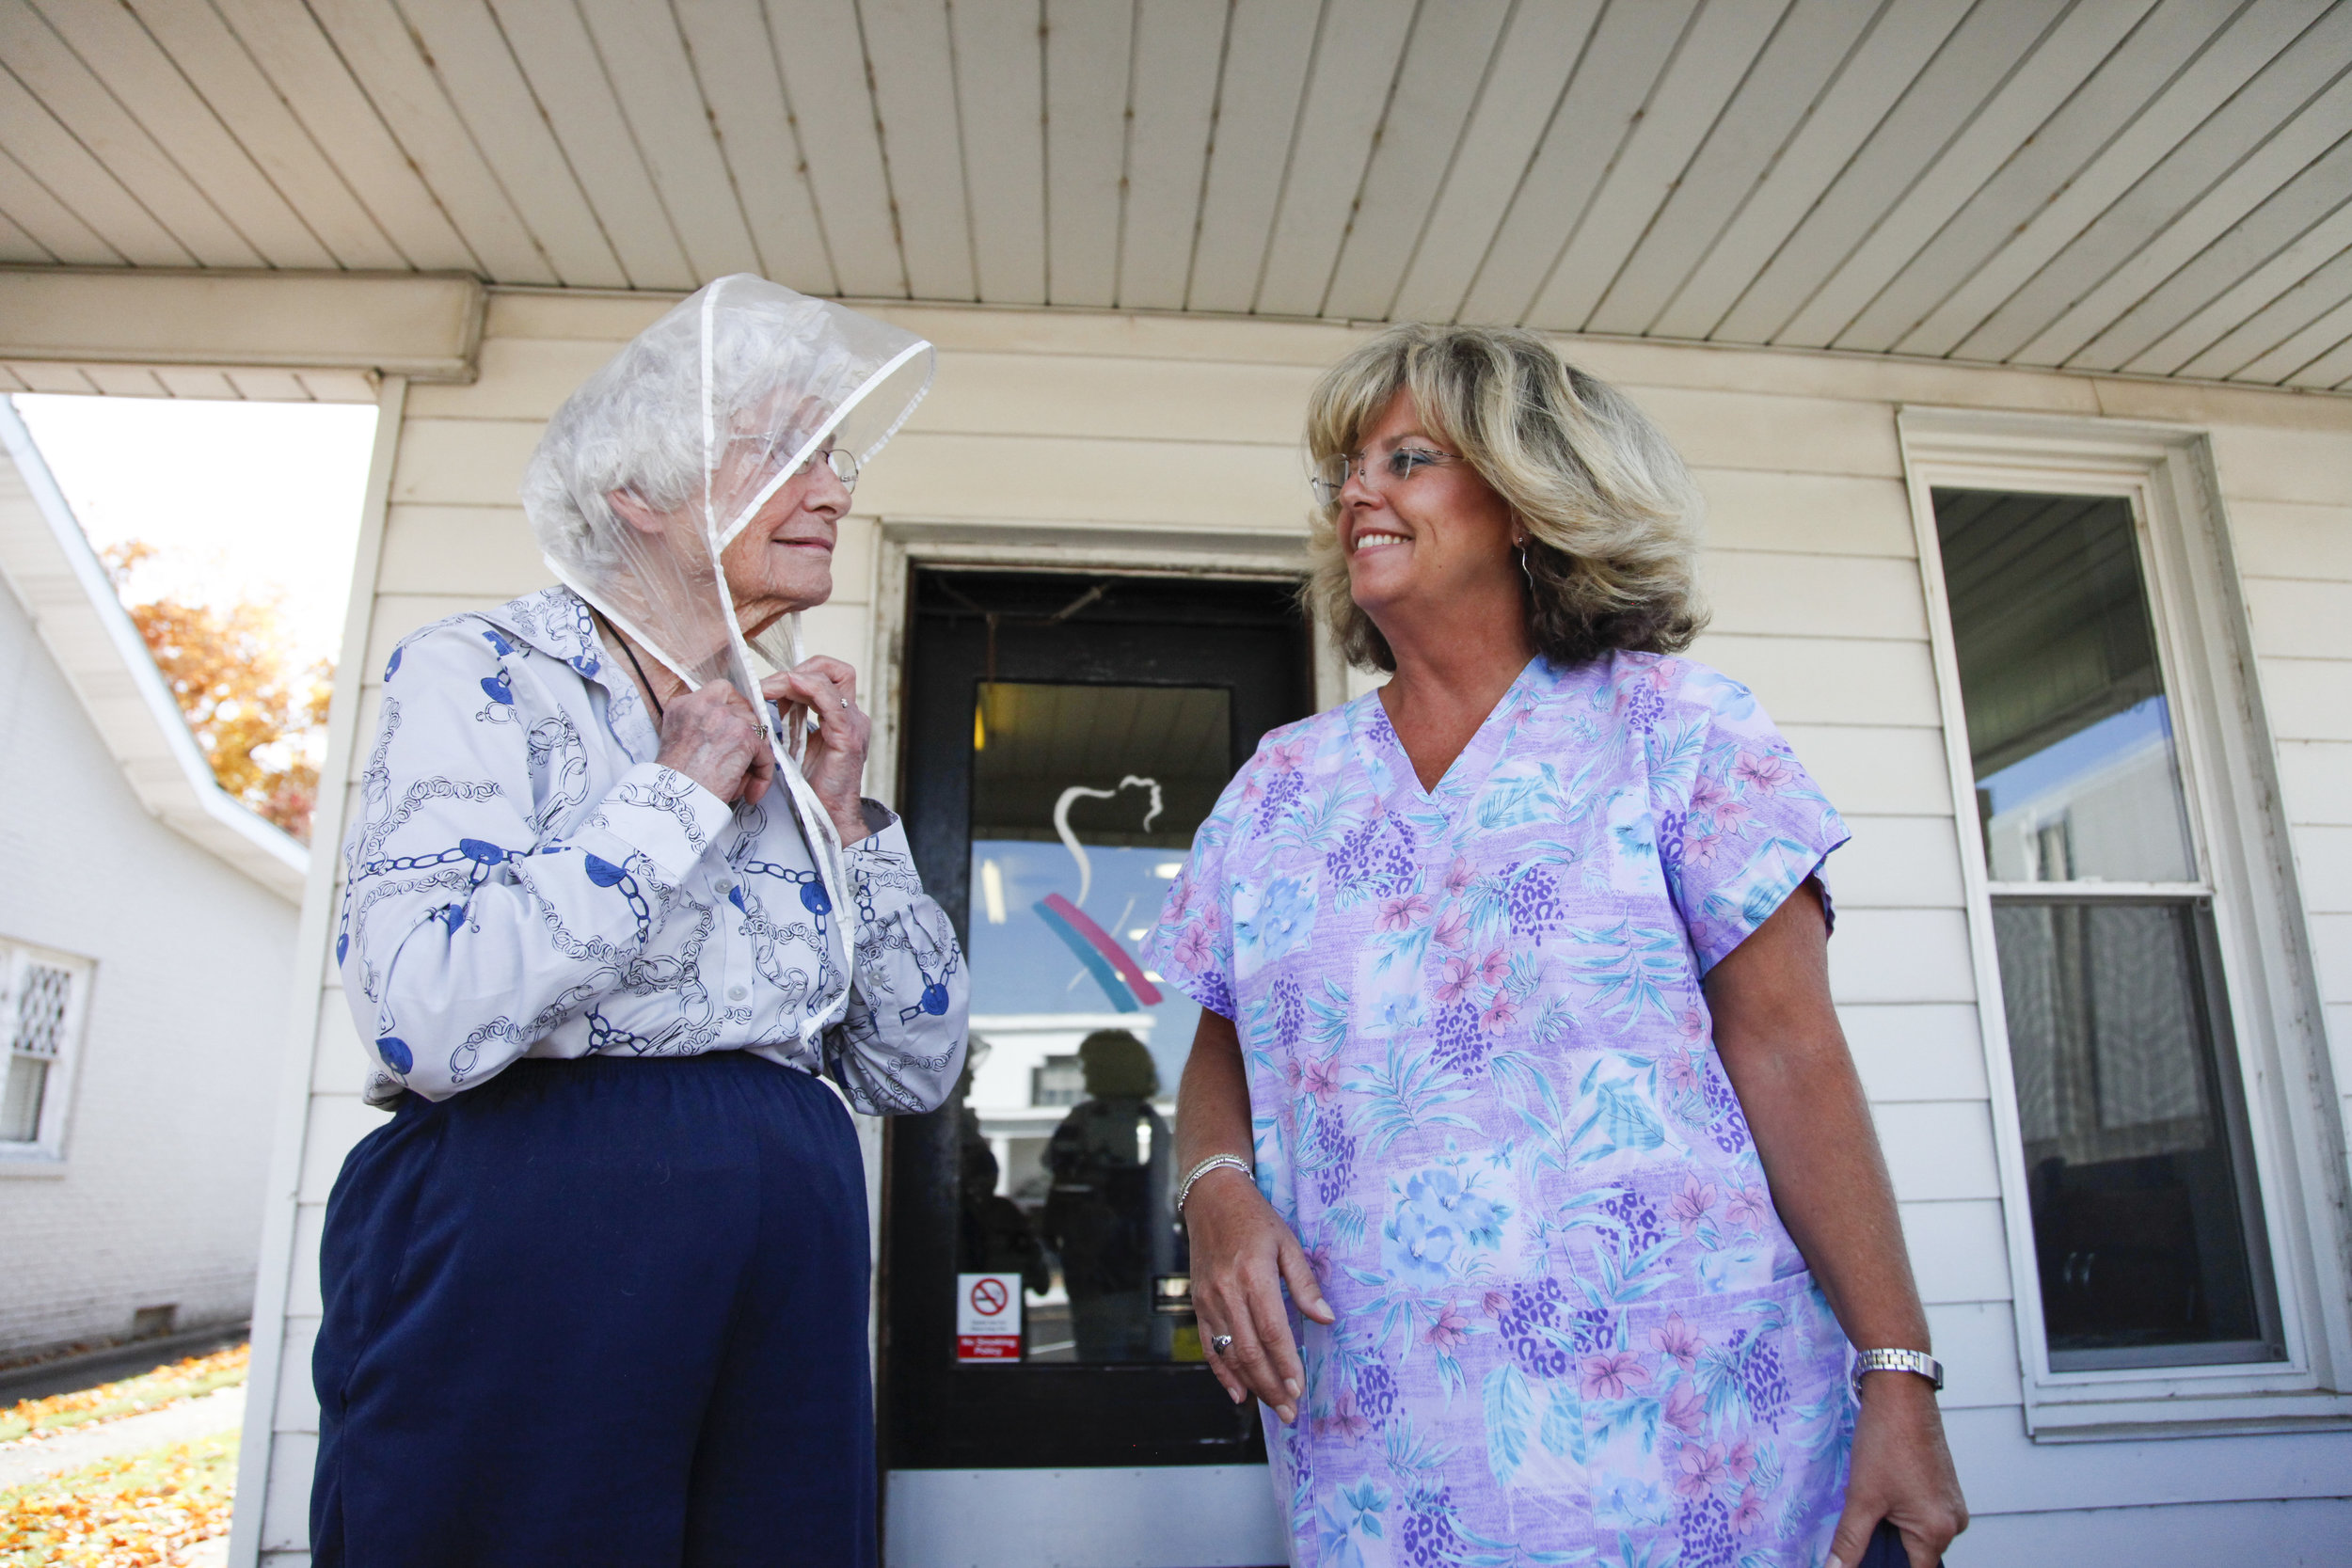   Kelly Alvey, (right), holds Gladys Luck's purse as she puts her rain scarf on after receiving her weekly hairdo at Kelly's Mane Event. Because 90-year-old Gladys has walking difficulties, Kelly assists her when she leaves the salon.     